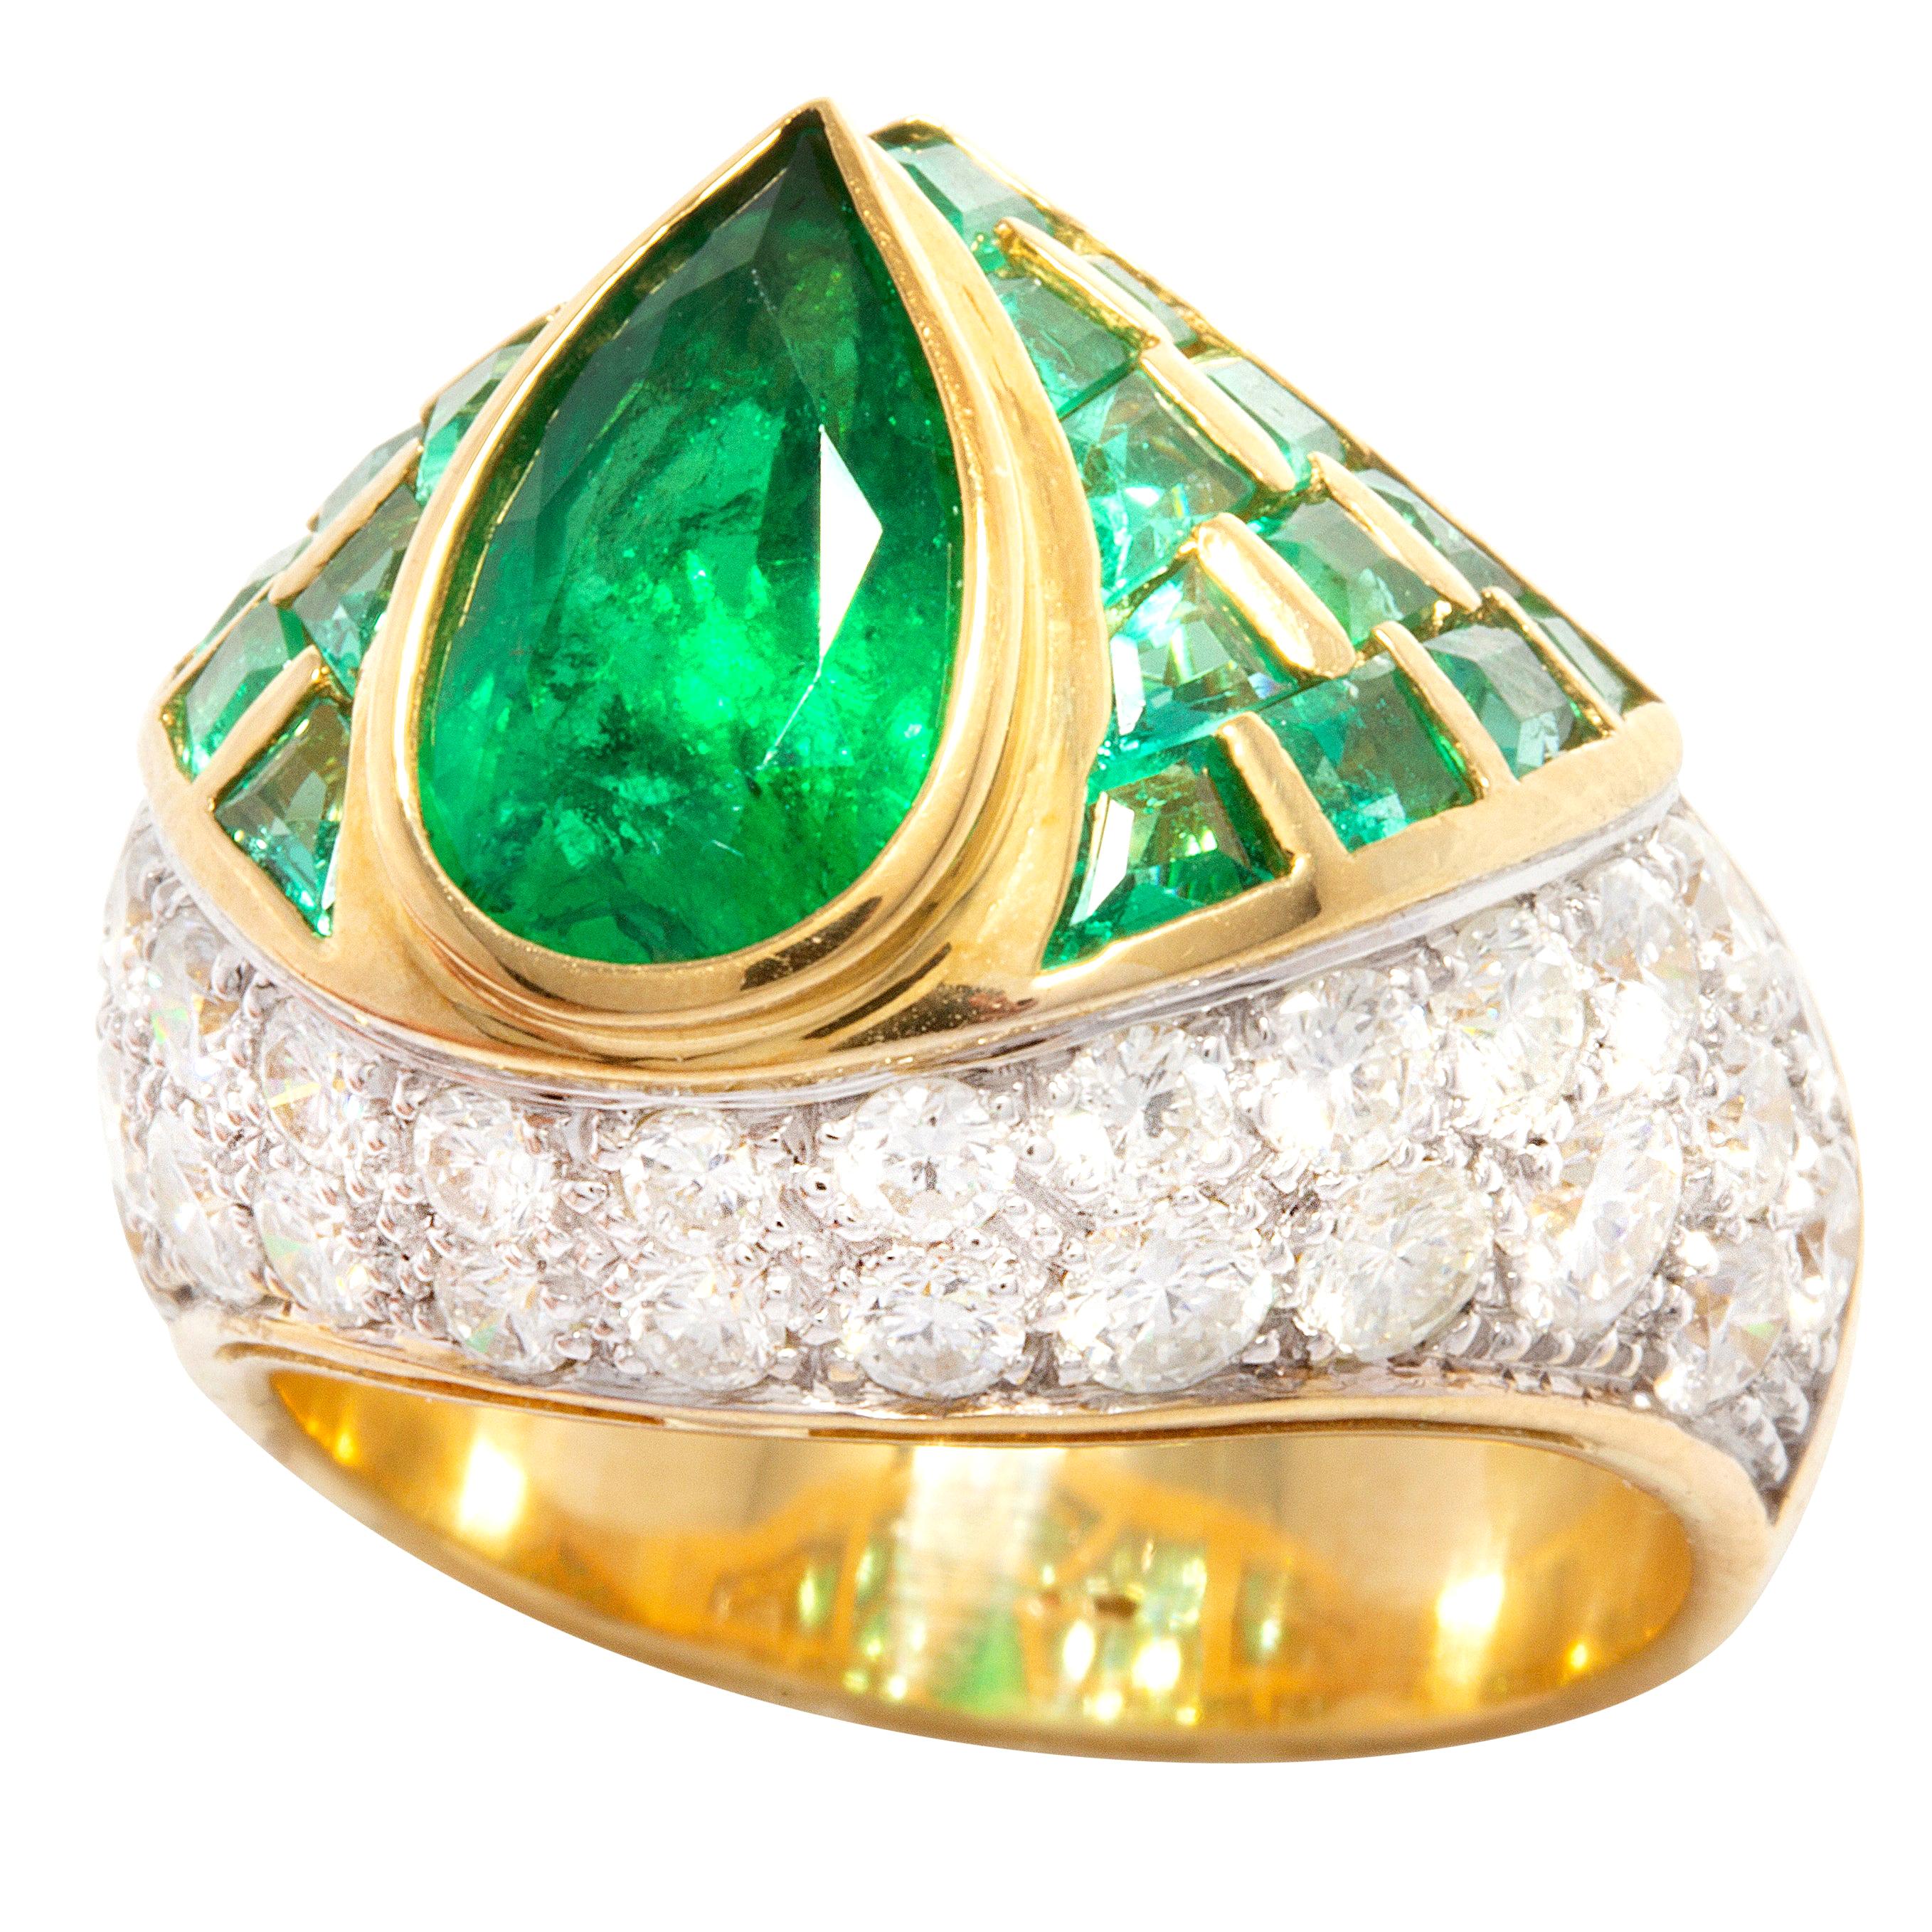 Ella Gafter Emerald Diamond Cocktail Ring For Sale